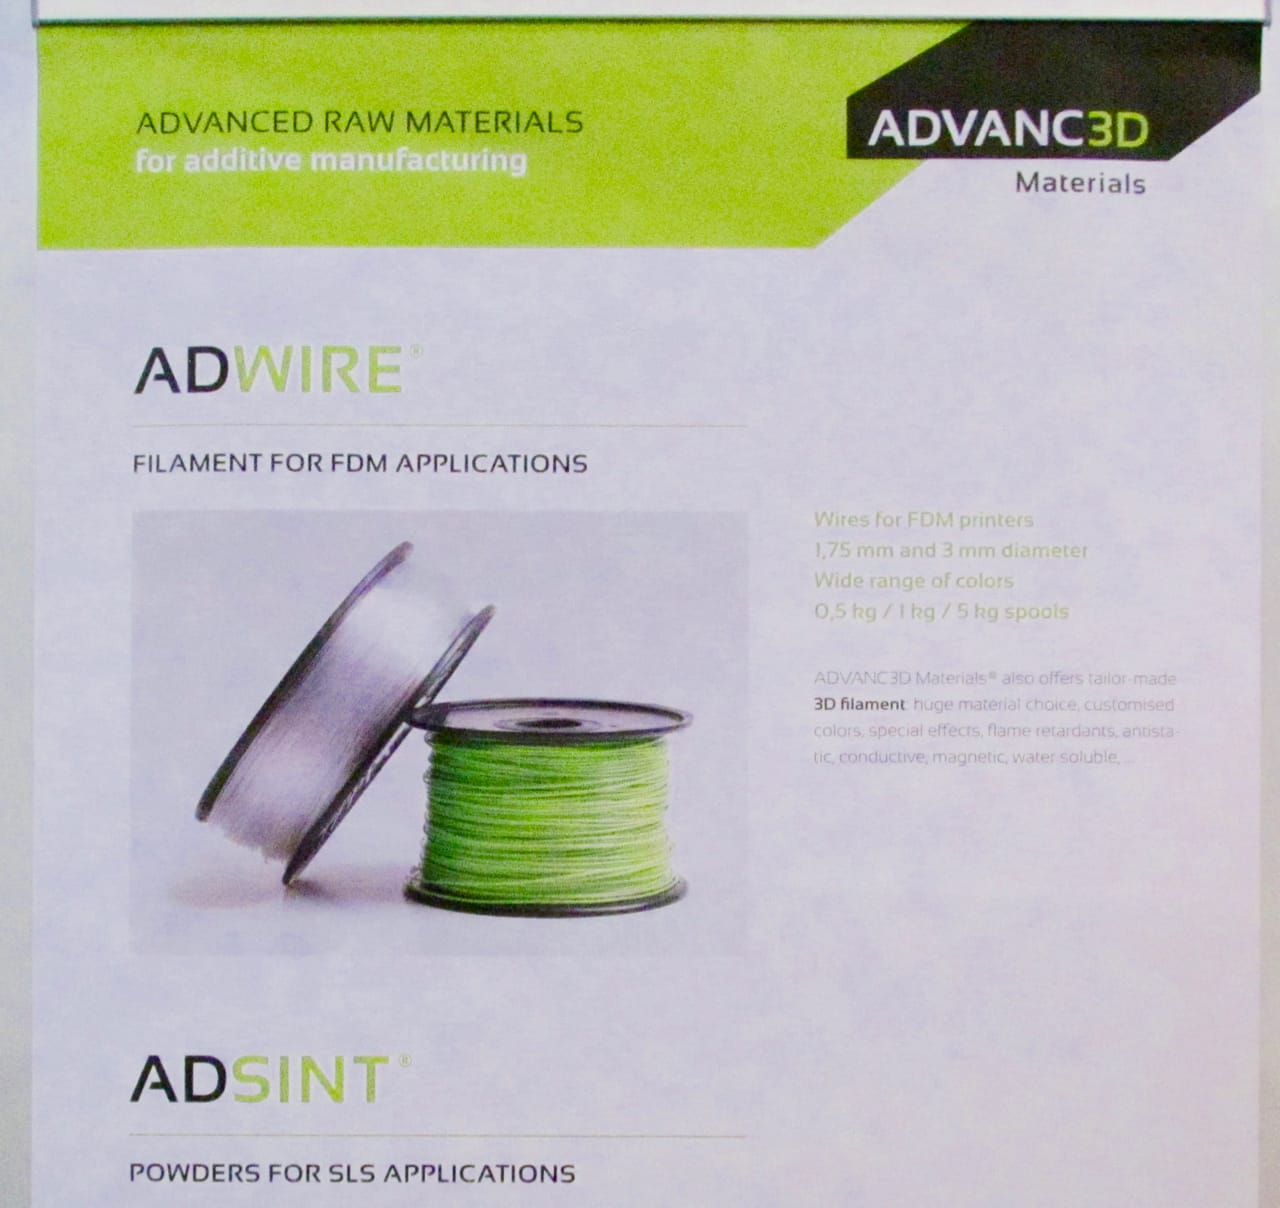  Earlier marketing material from ADVANC3D Materials showing they do produce 3D printer filaments 